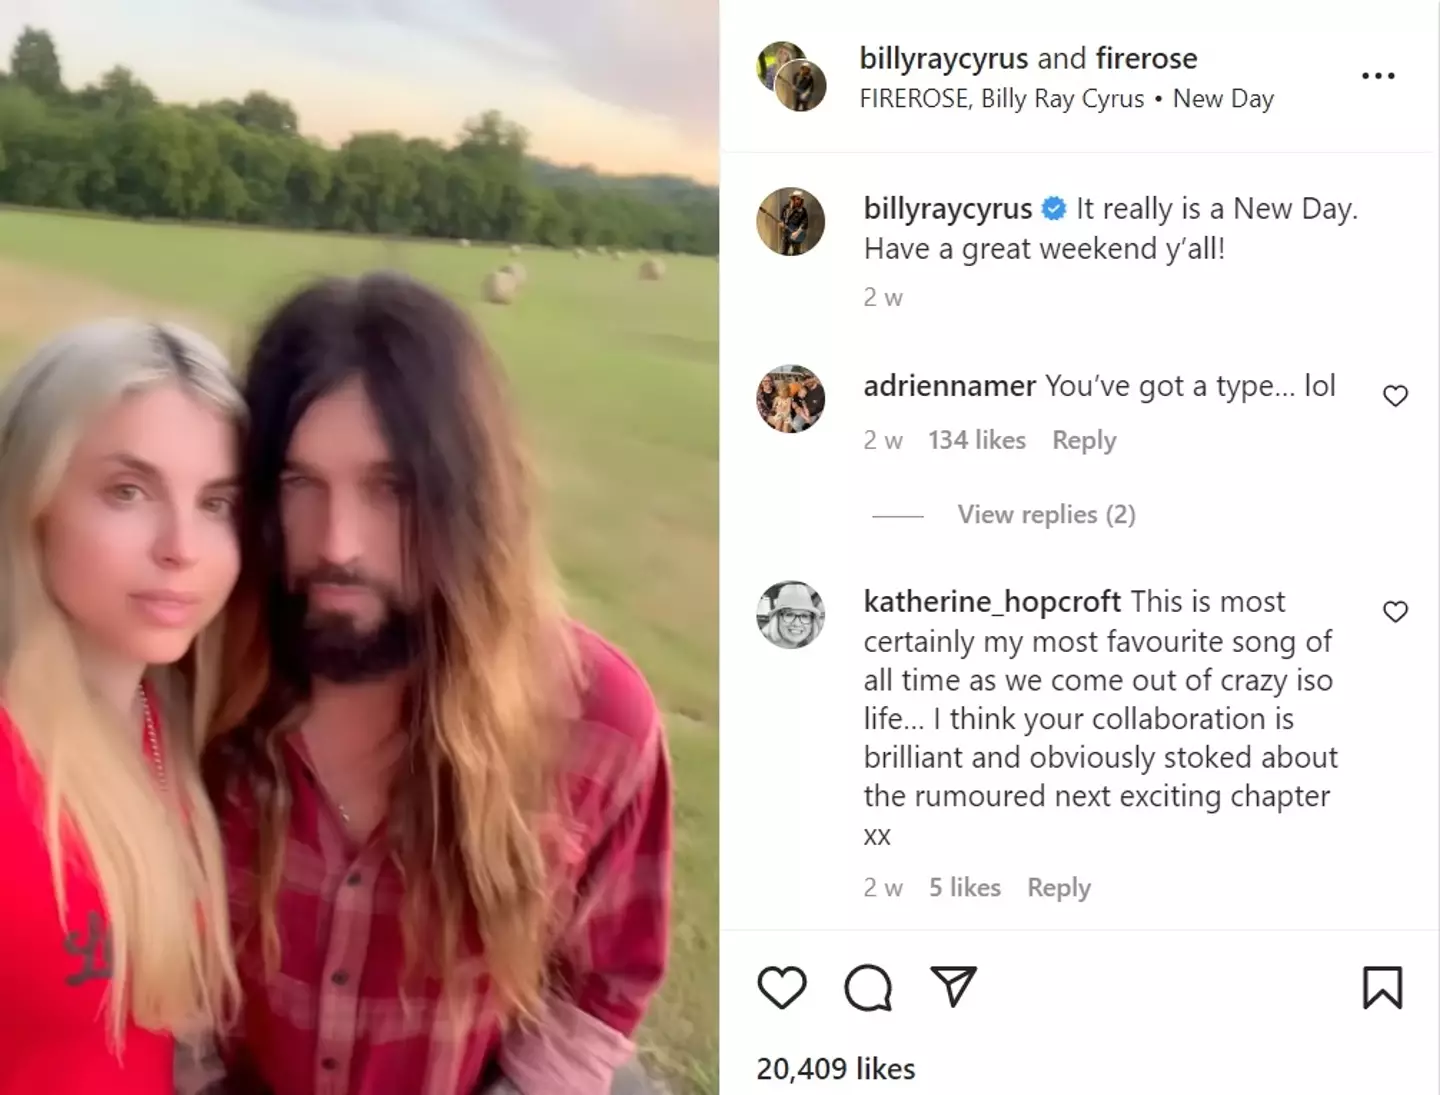 Billy Ray Cyrus posted a video of himself together with Firerose.